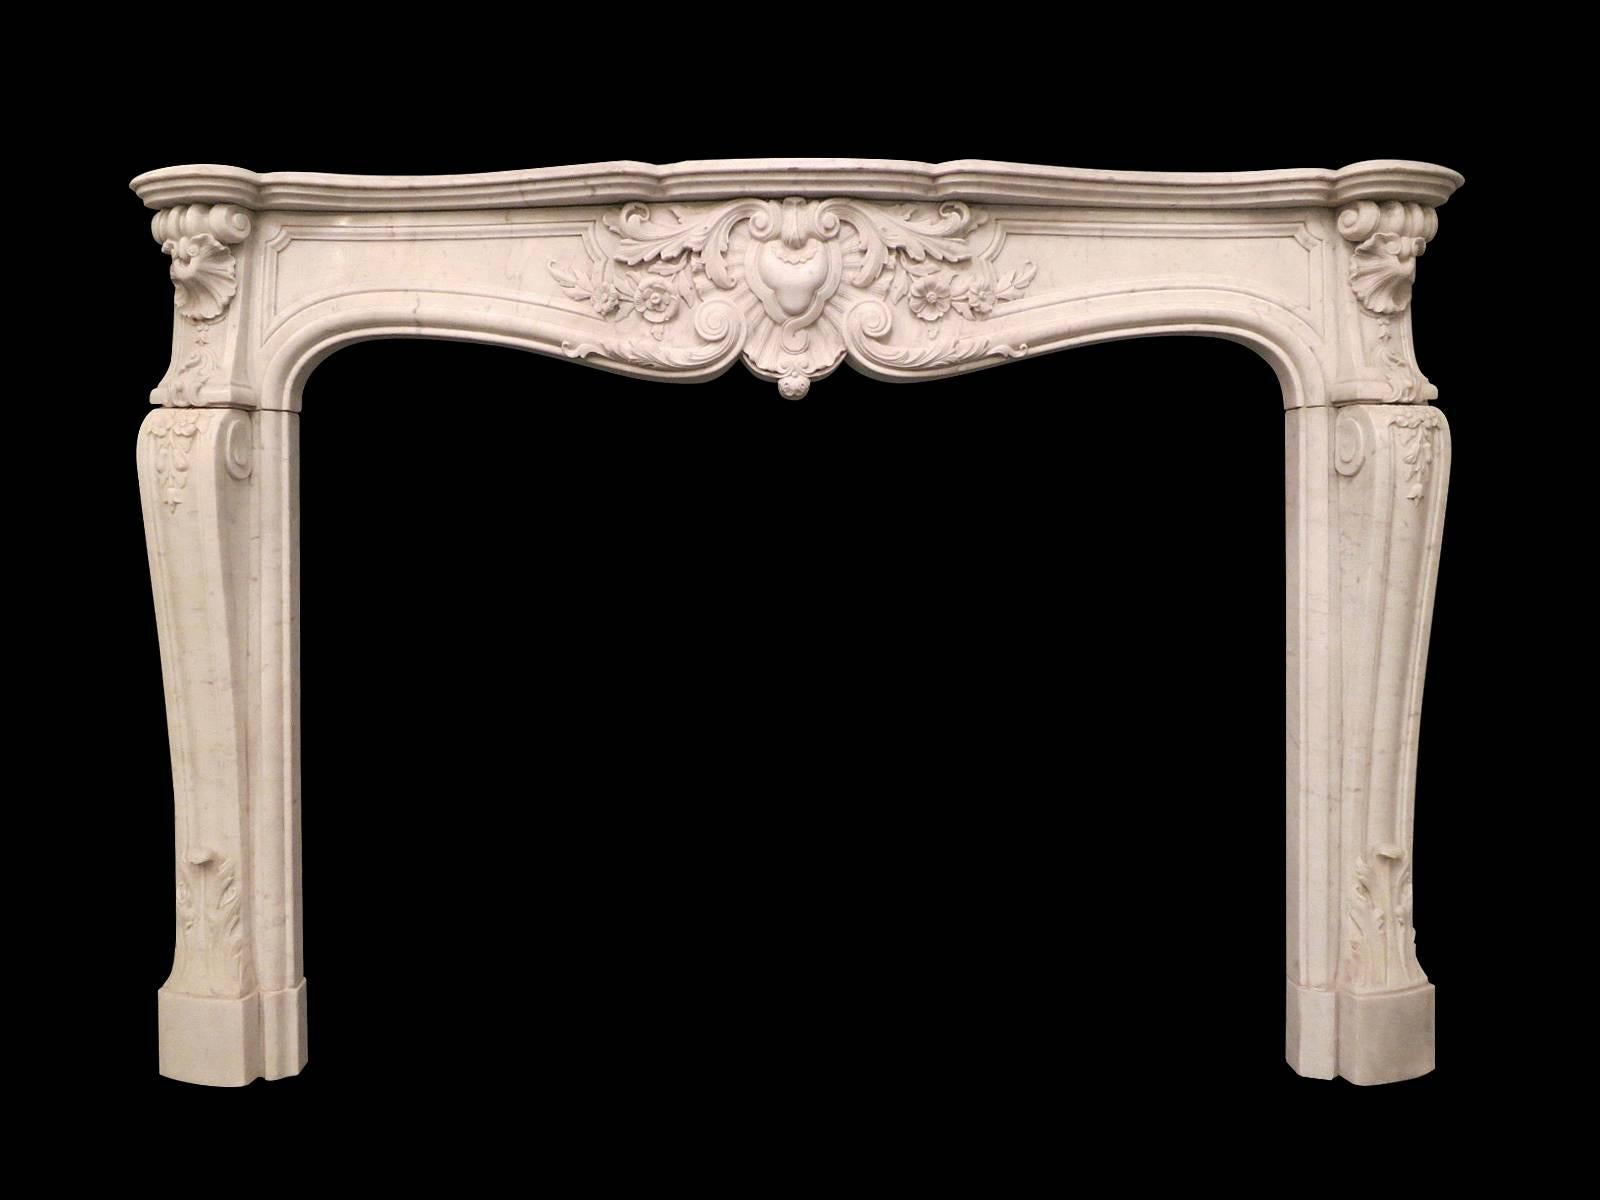 A Louis XV style fireplace in pale Carrara marble, the frieze with a carved central cartouche of C scrolled foliage, flowers and medallion. The end blocks with carved shell and foliate carvings descending into conforming carvings on the jambs with